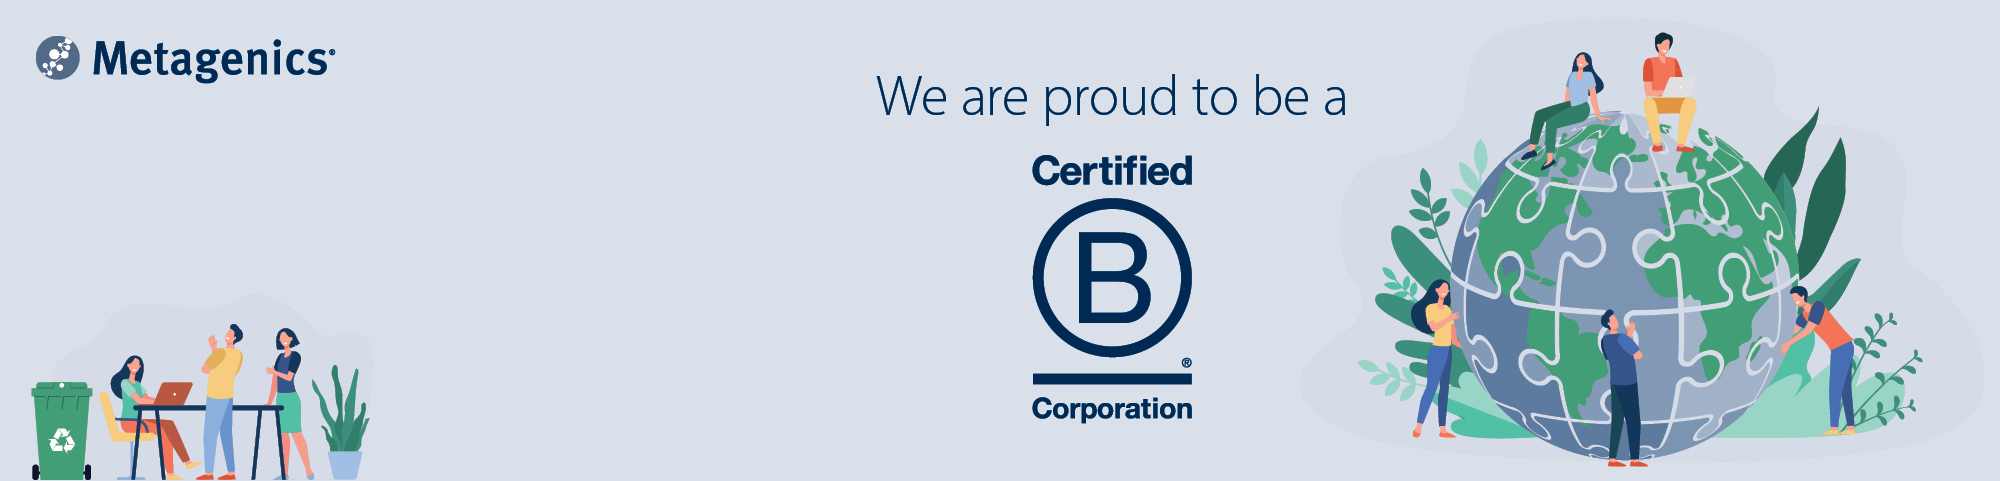 We are proud to be a Certified B Corporation